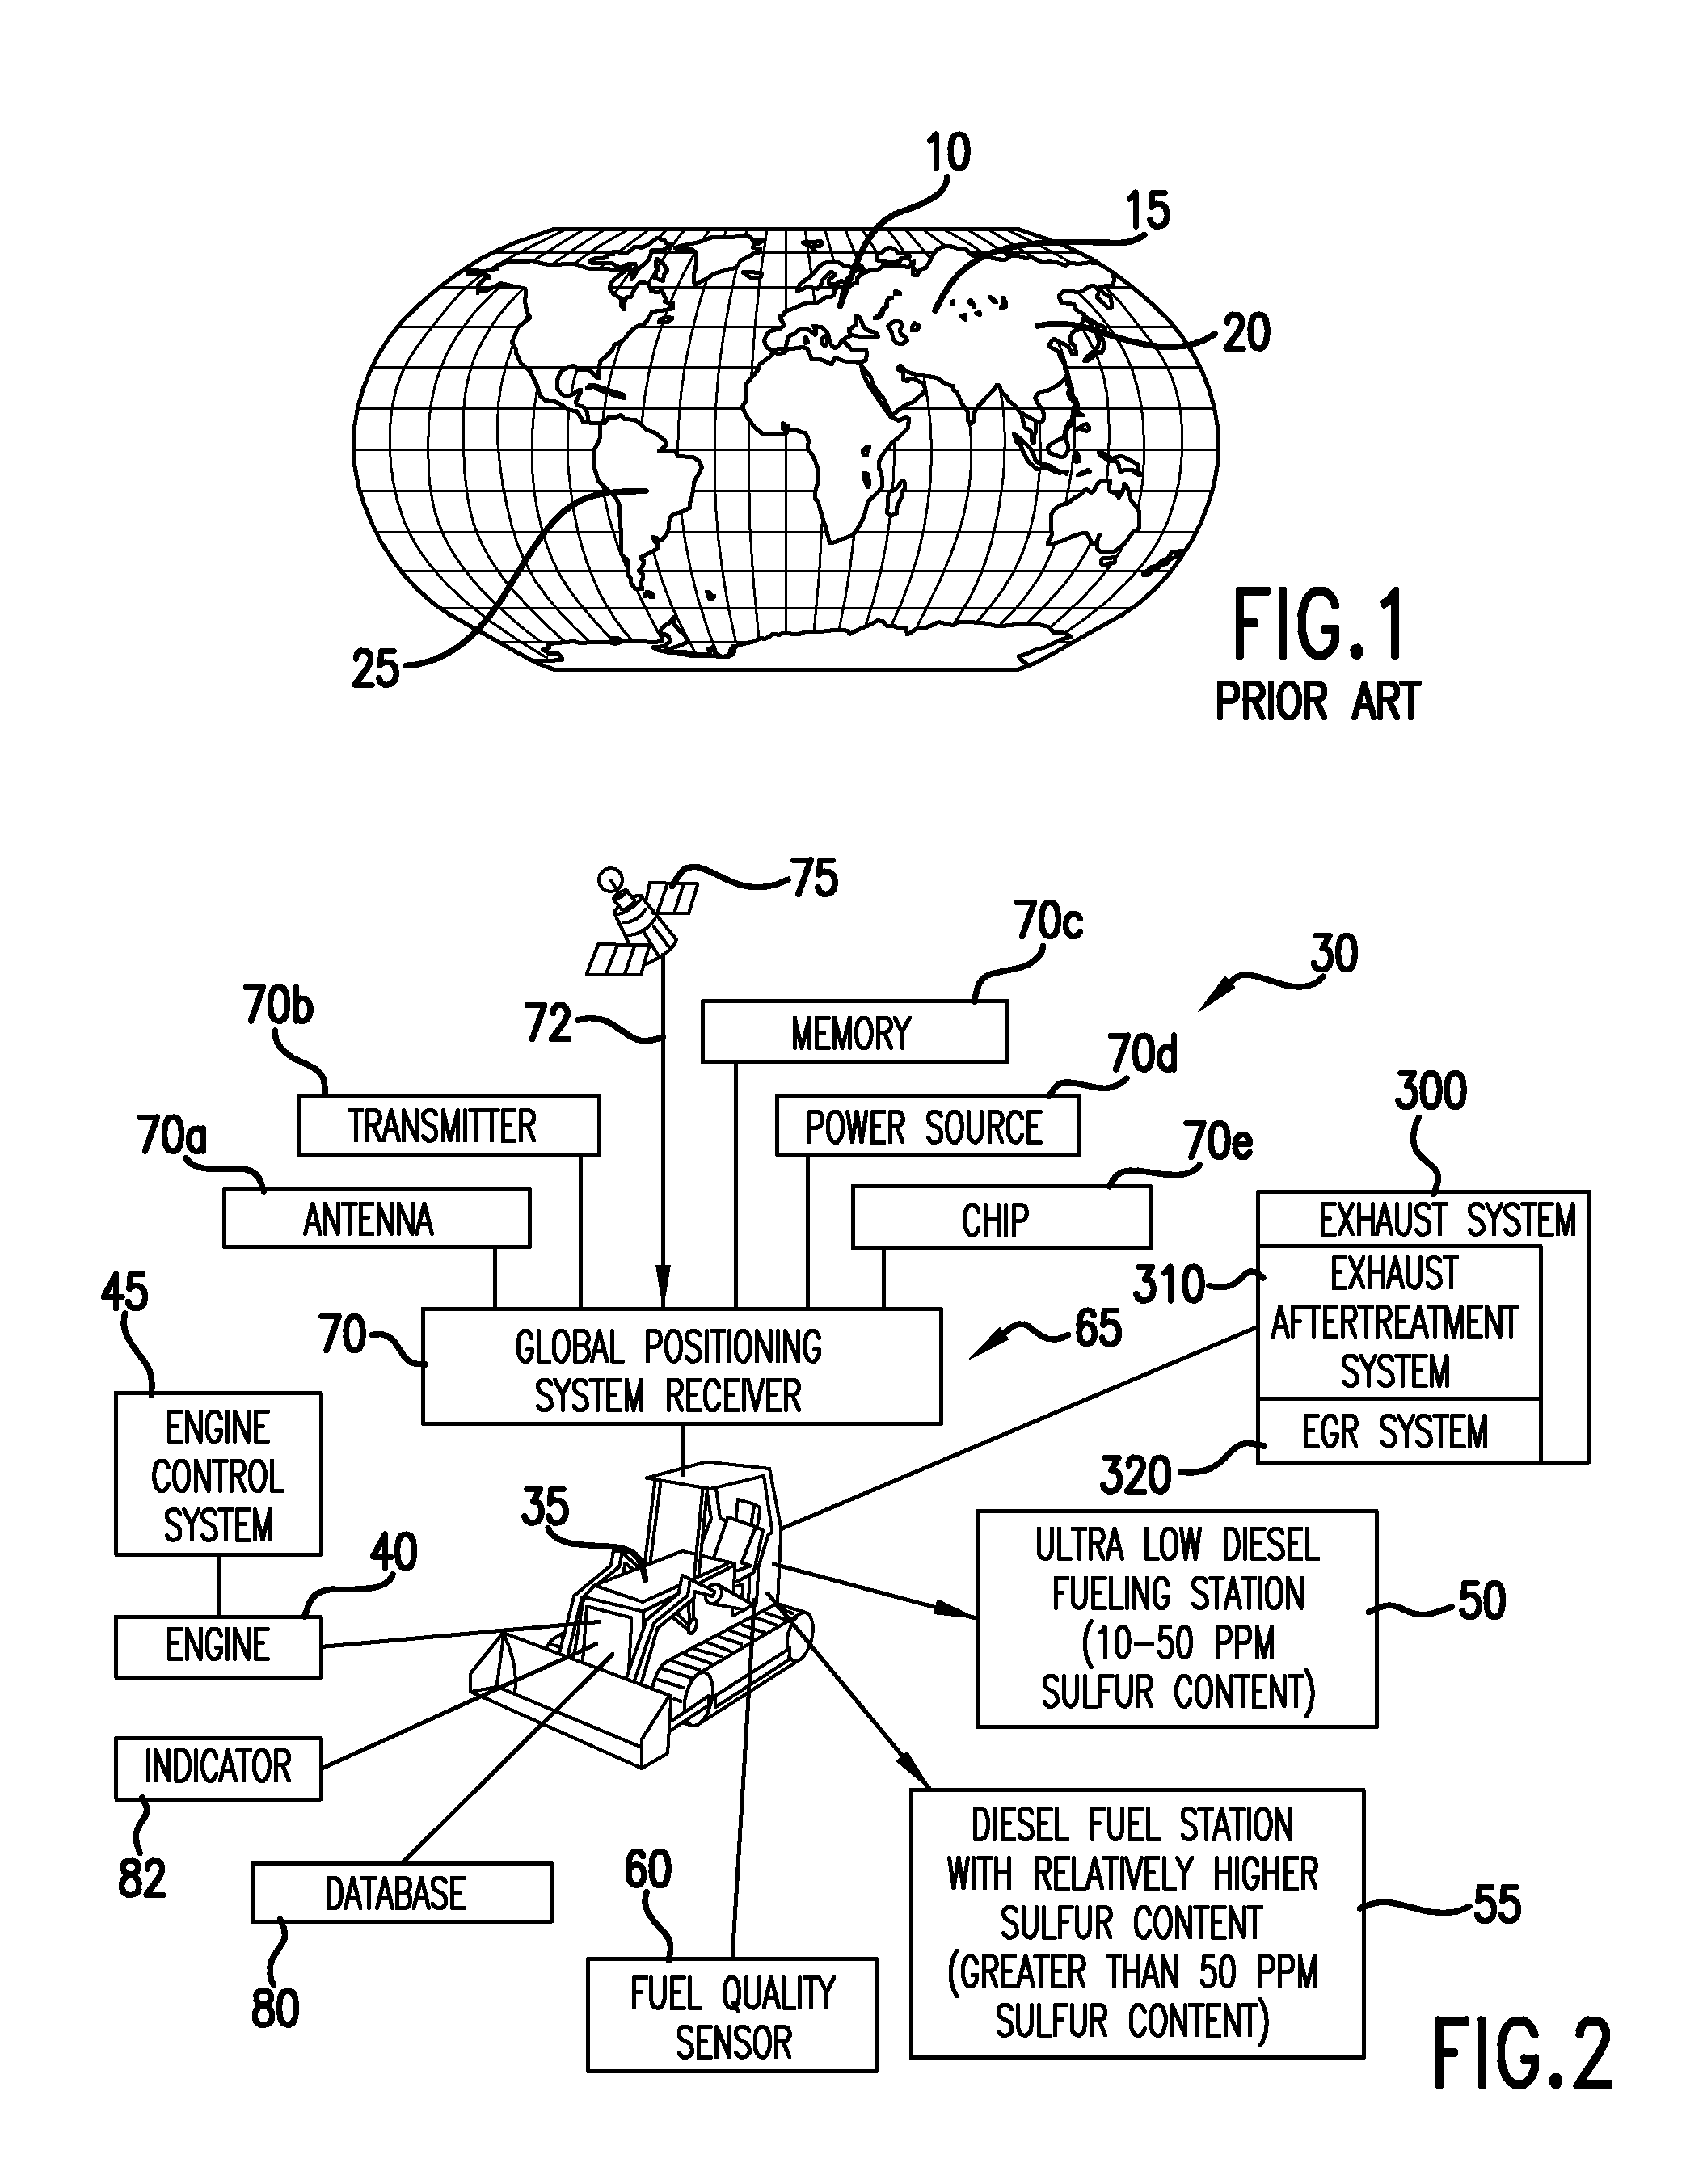 Engine control system and method based on fuel quality